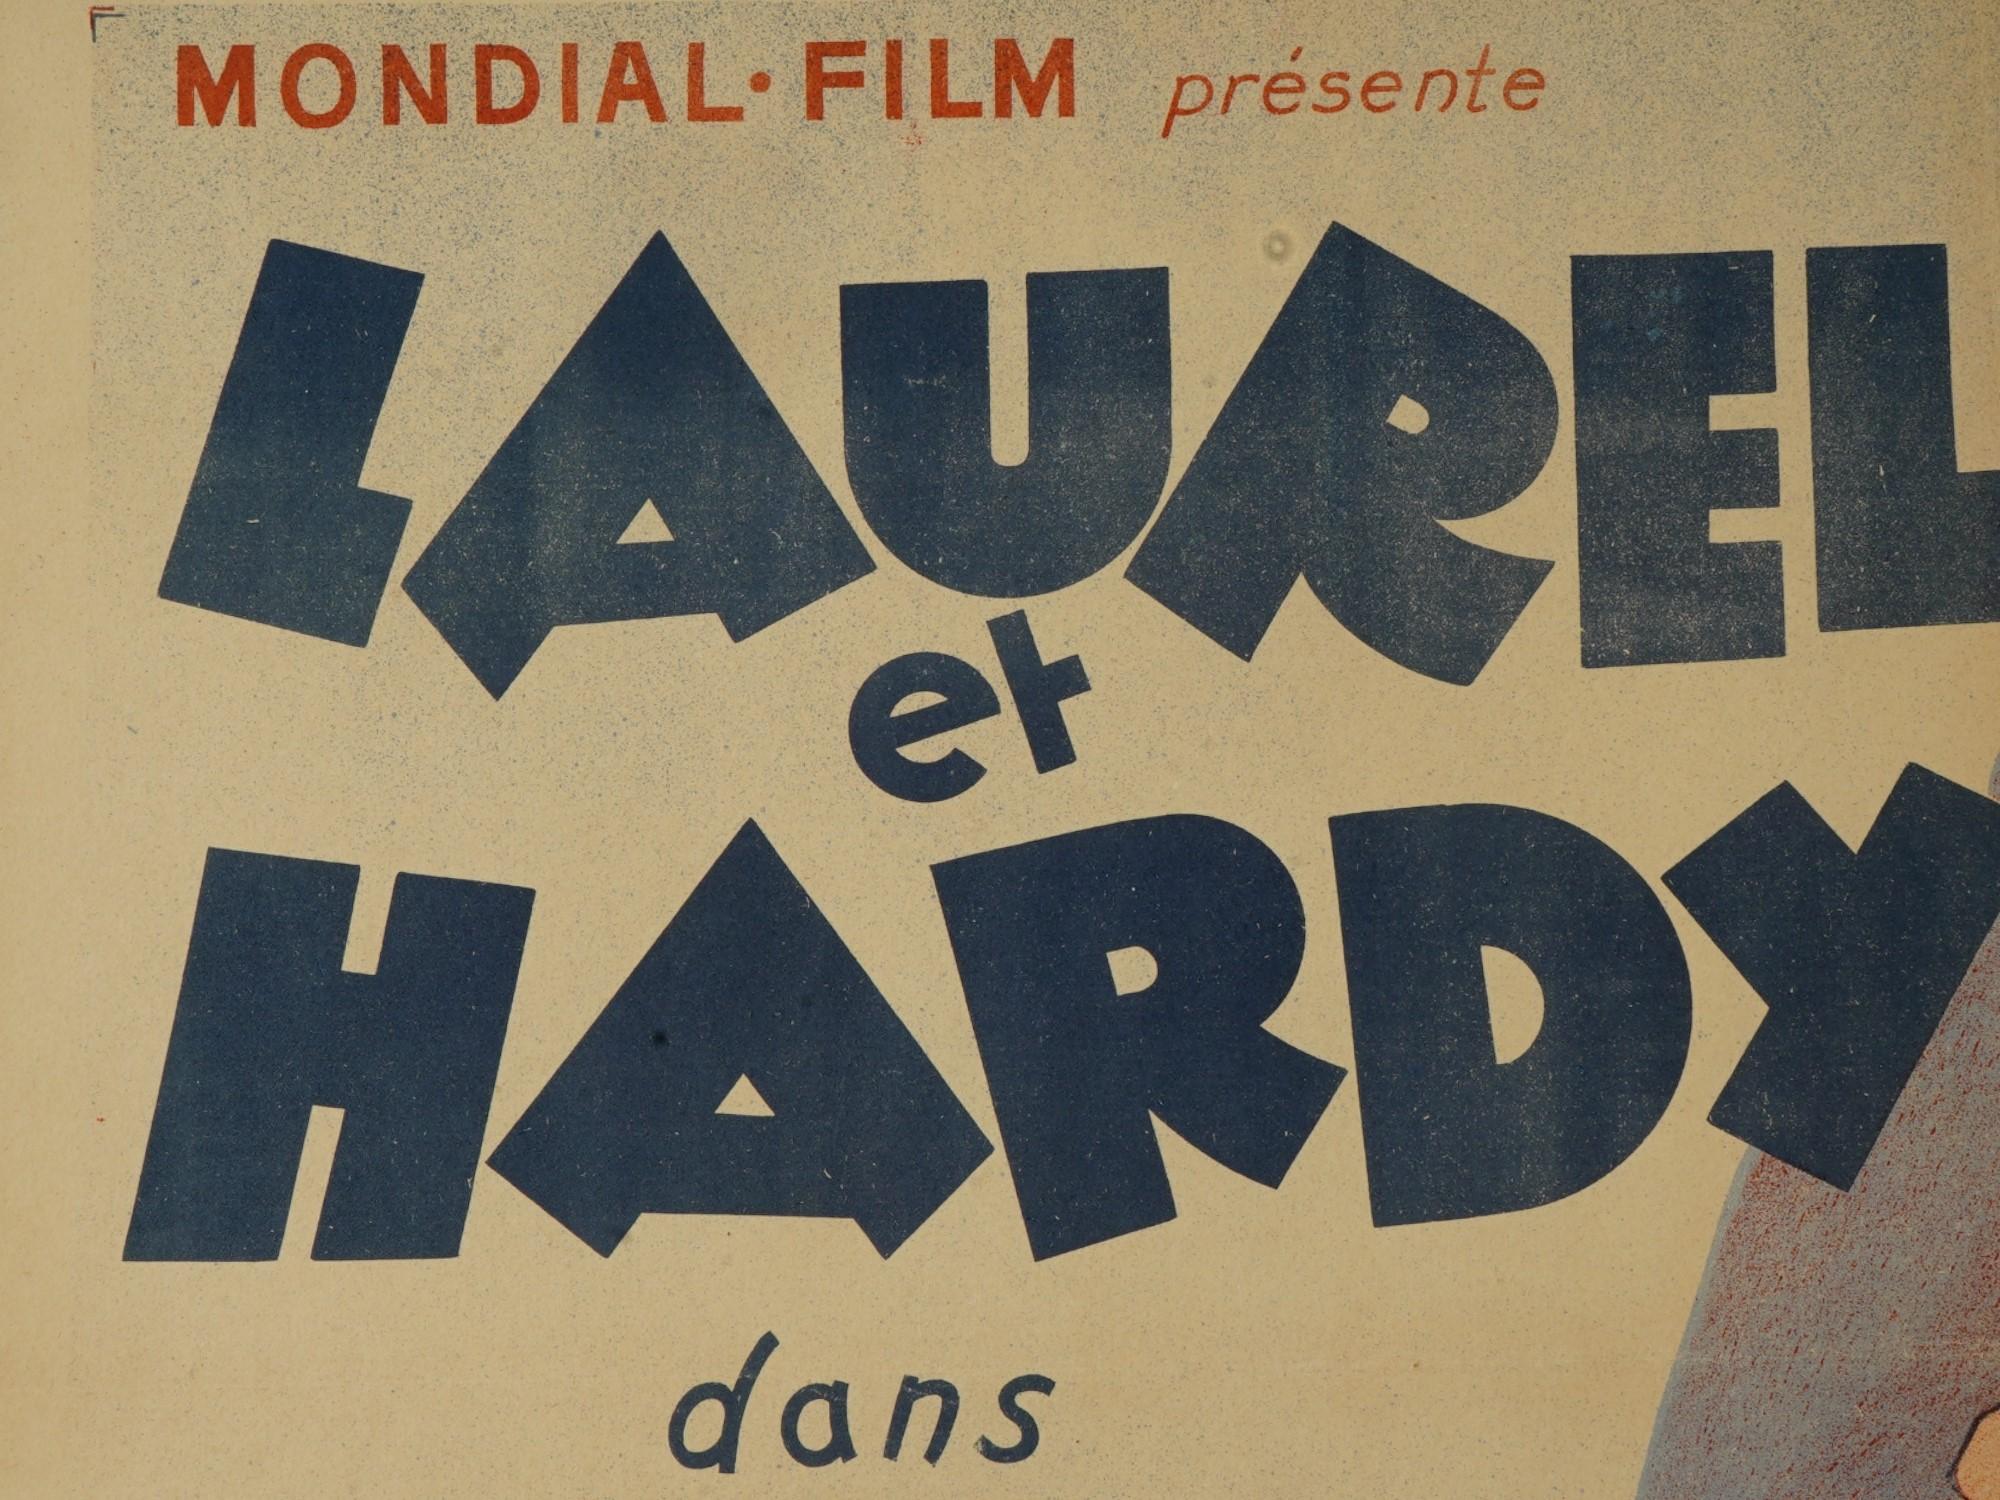 FRENCH LAUREL AND HARDY MOVIE POSTER BY GRINSSON PIC-1